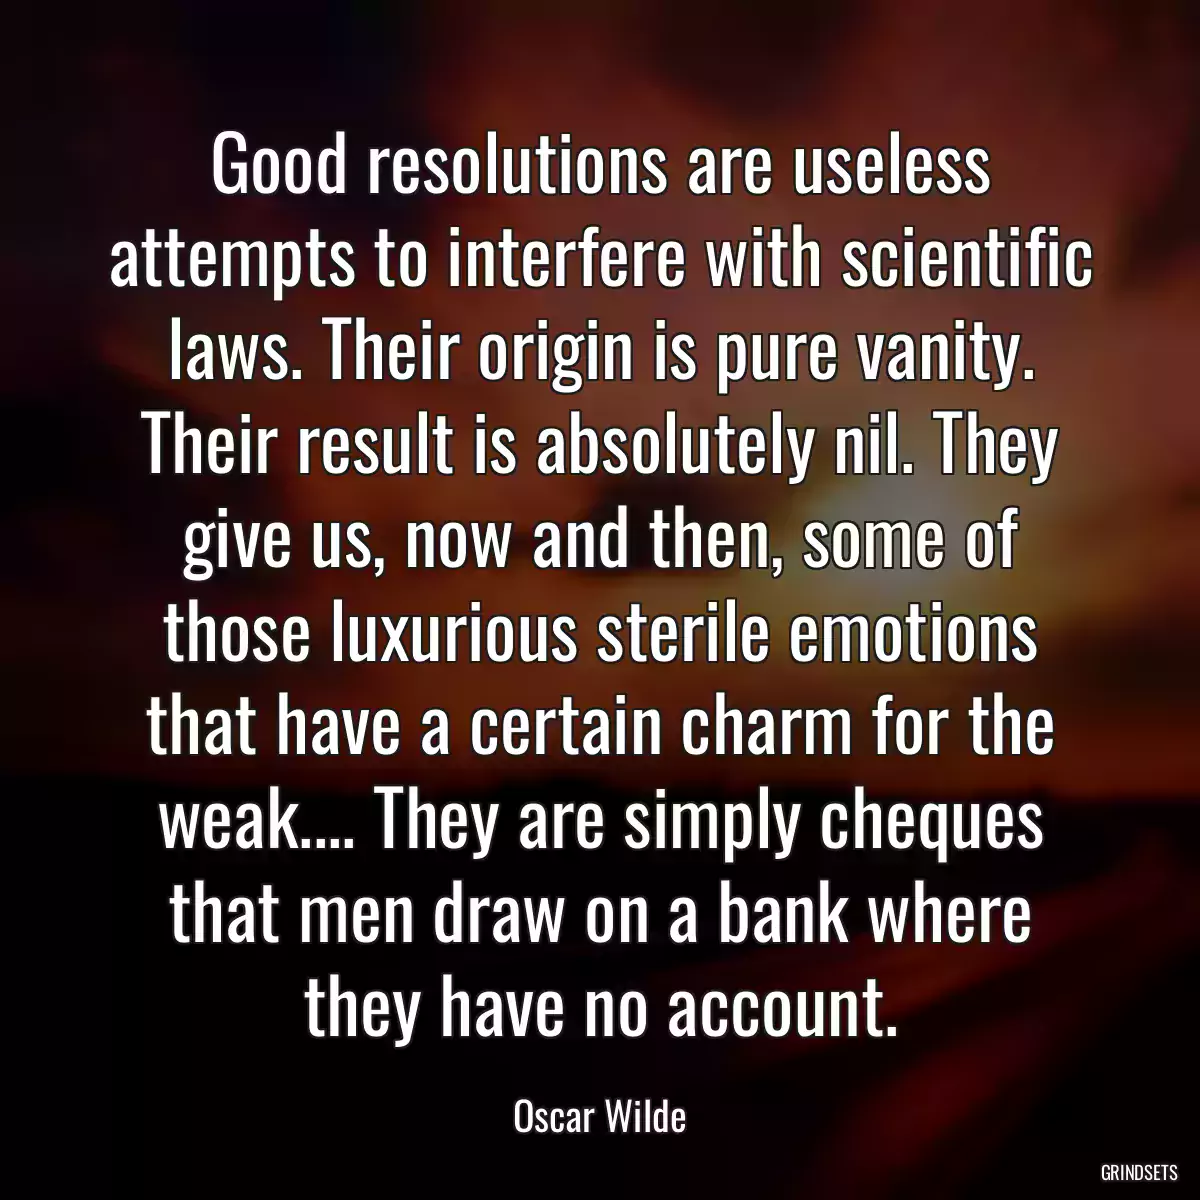 Good resolutions are useless attempts to interfere with scientific laws. Their origin is pure vanity. Their result is absolutely nil. They give us, now and then, some of those luxurious sterile emotions that have a certain charm for the weak.... They are simply cheques that men draw on a bank where they have no account.